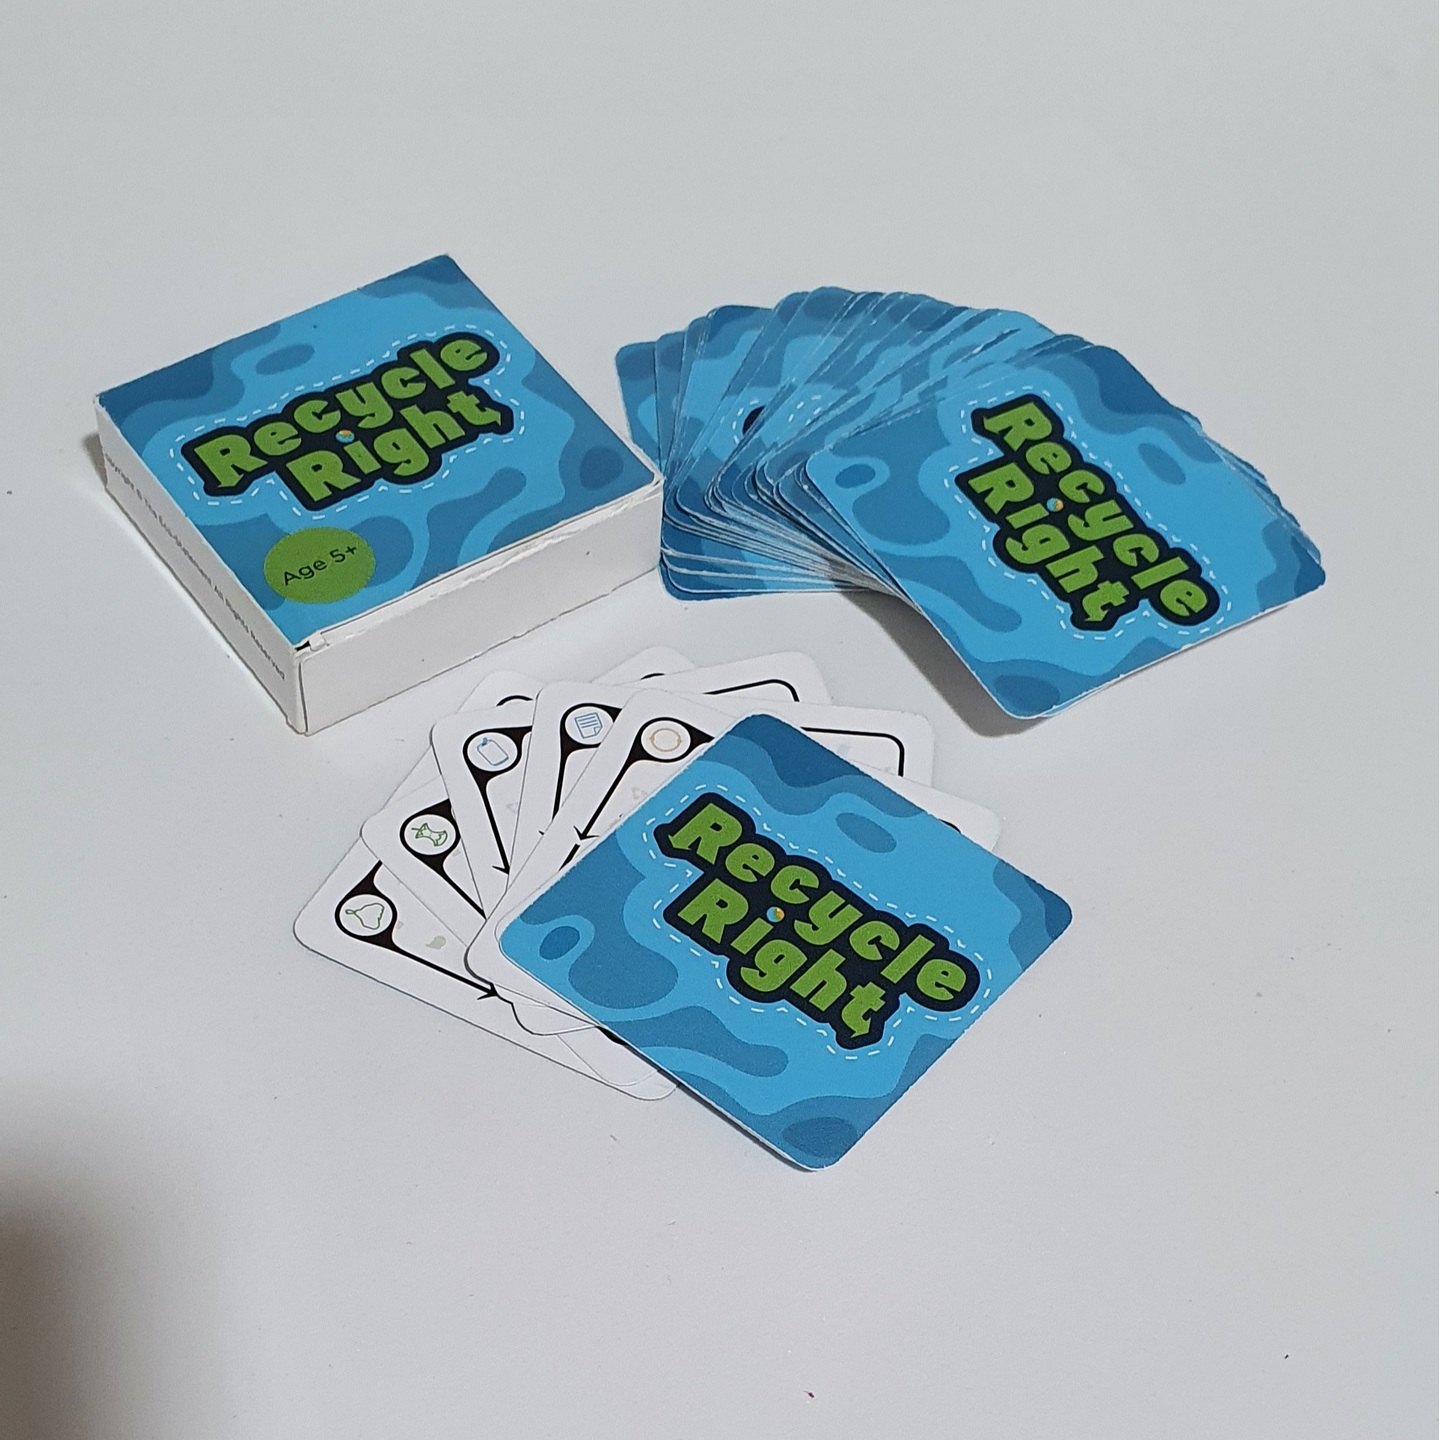 RecycleRight Card Game